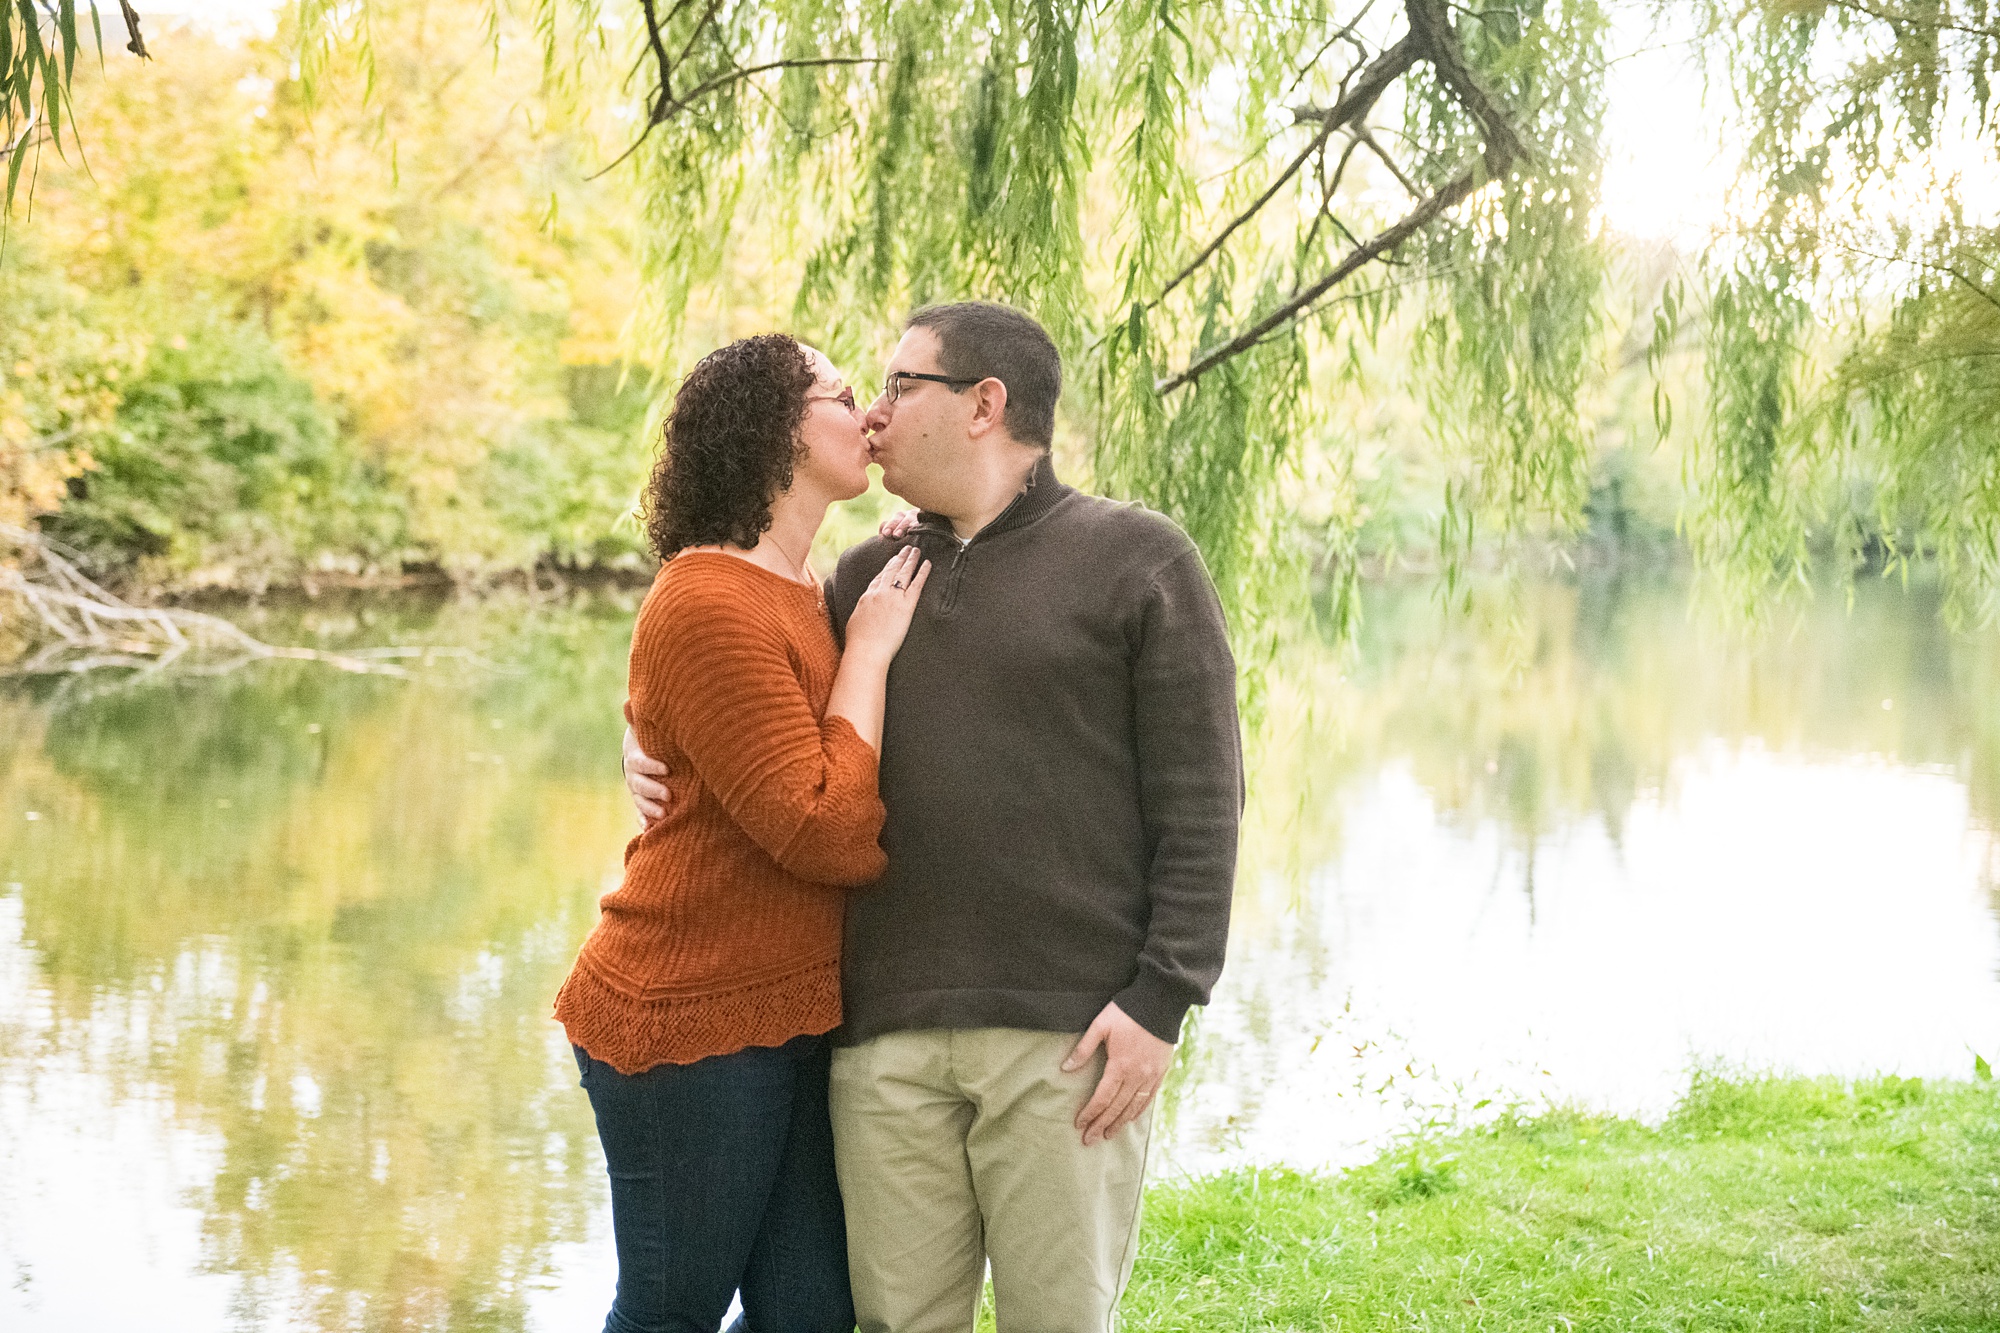 parents kiss during Baker Park family portraits in Downtown Frederick